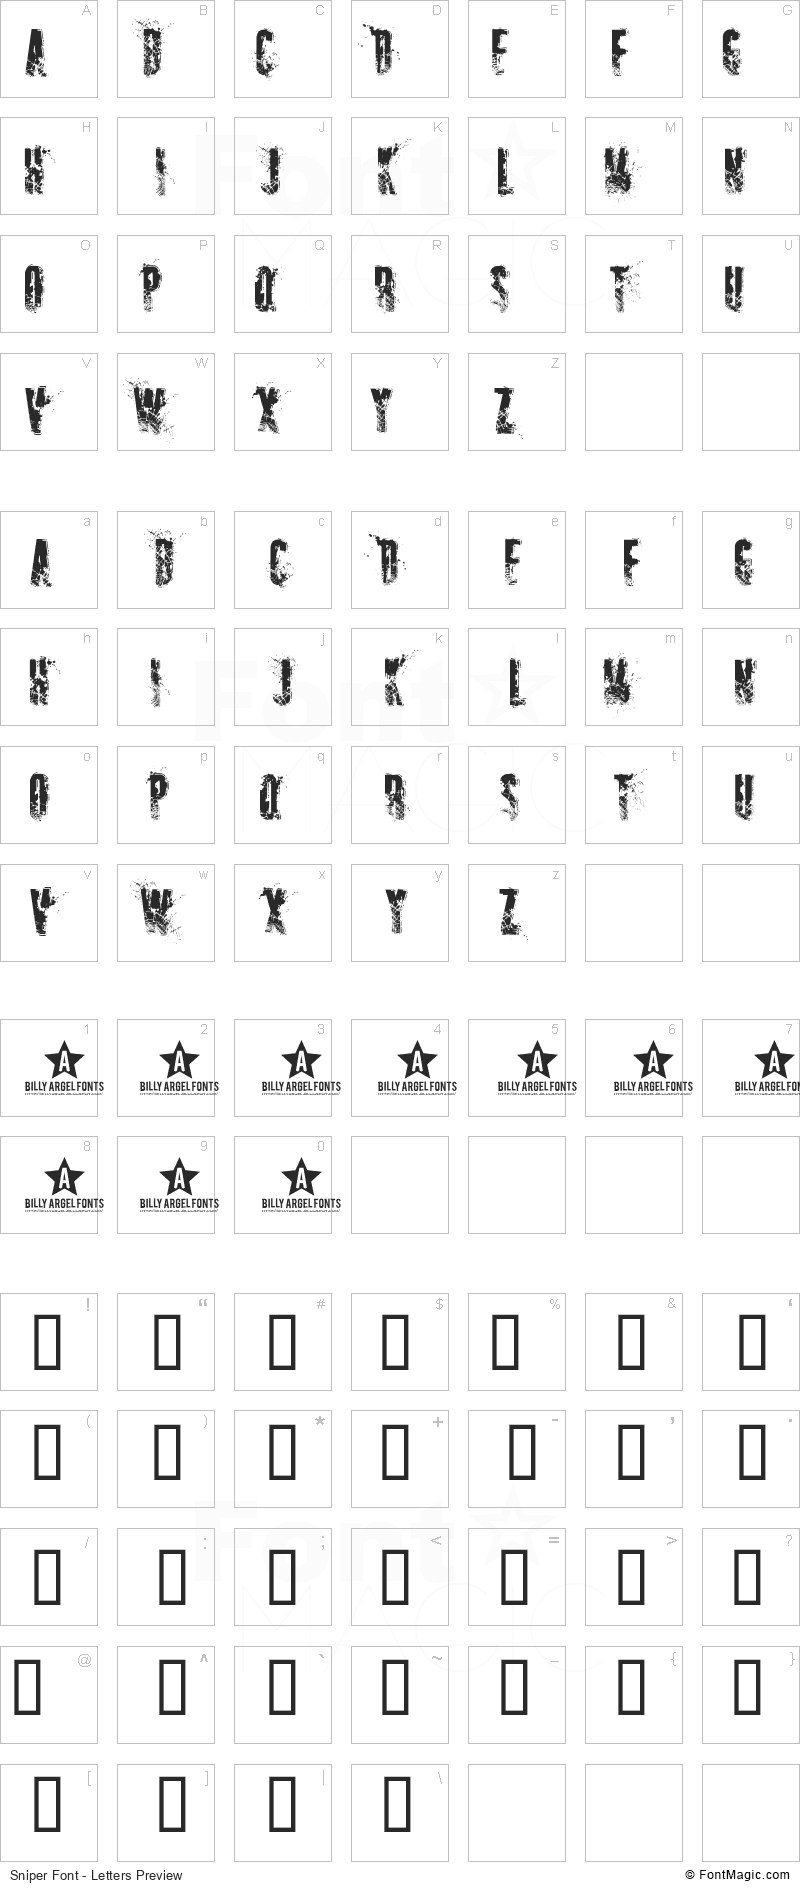 Sniper Font - All Latters Preview Chart